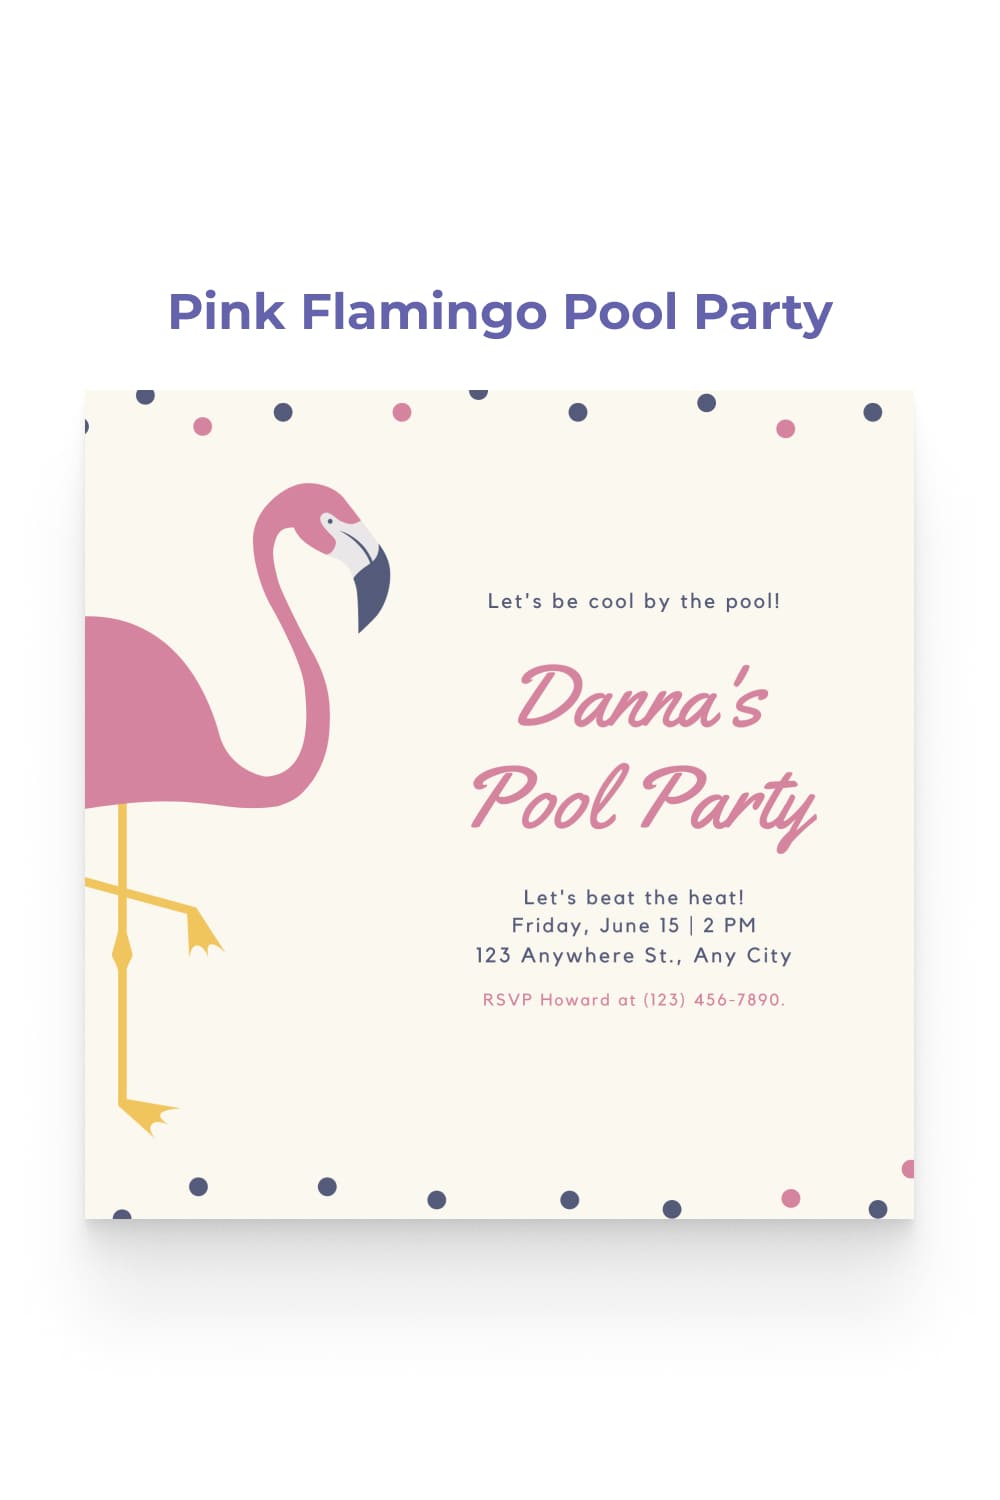 Pool party invitation with an image of a pink flamingo.